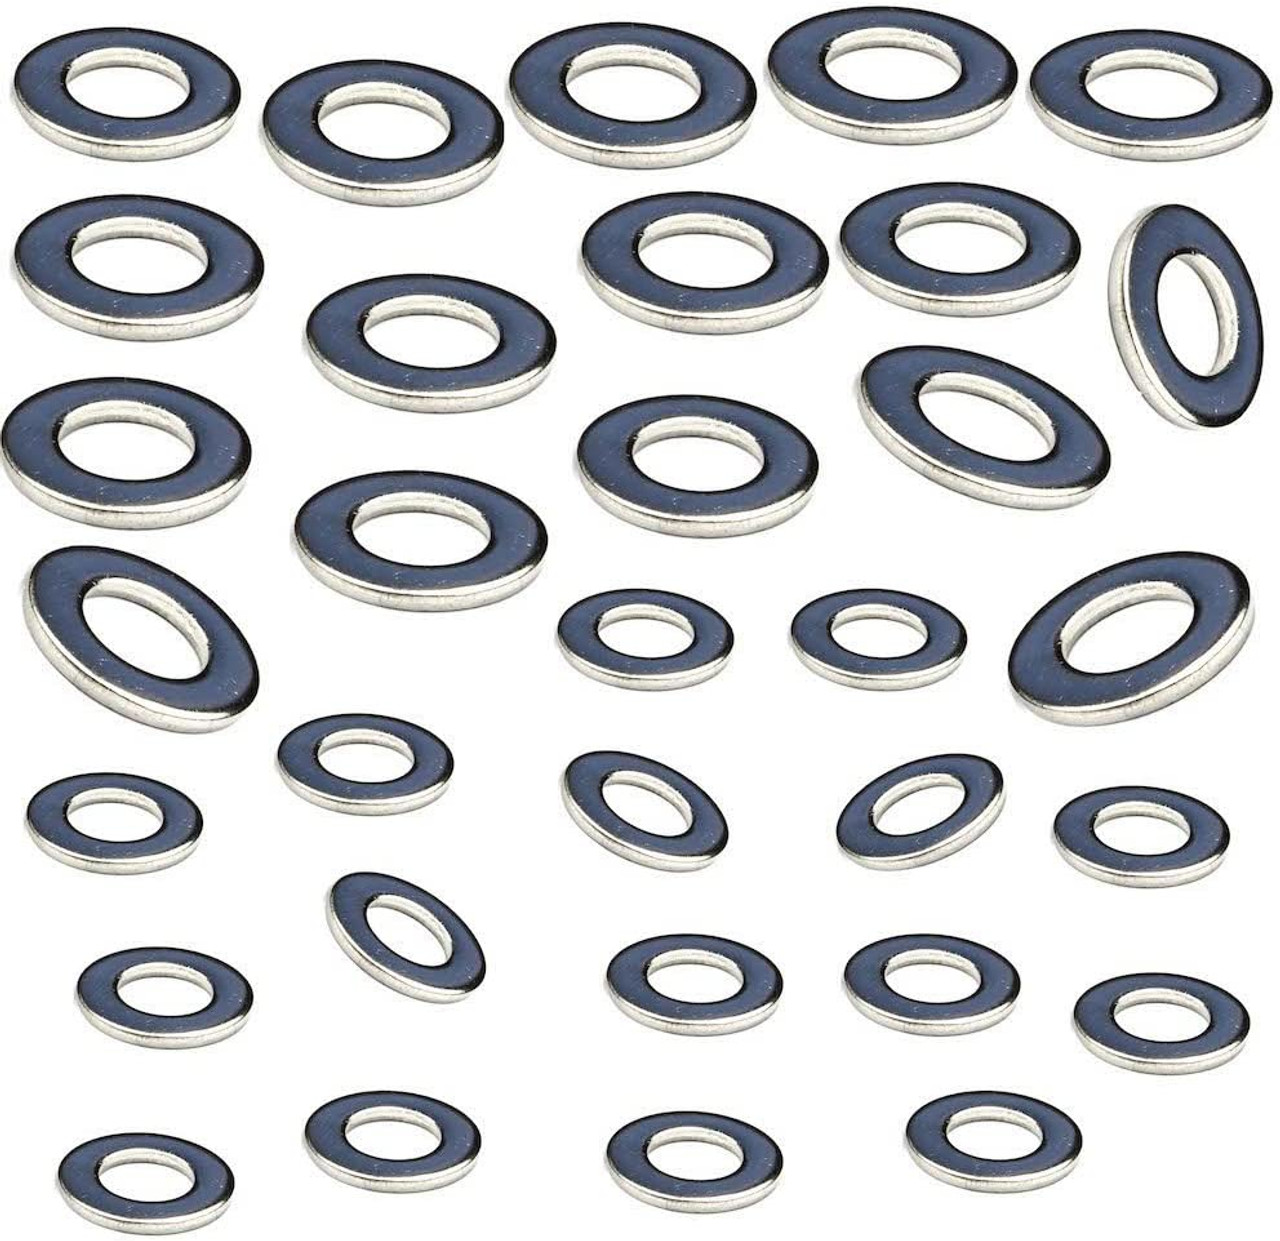 M10 Washer x 16 M12 Washer x 16 A2 Stainless Steel Form A Thick Flat Washers (32 Pack)